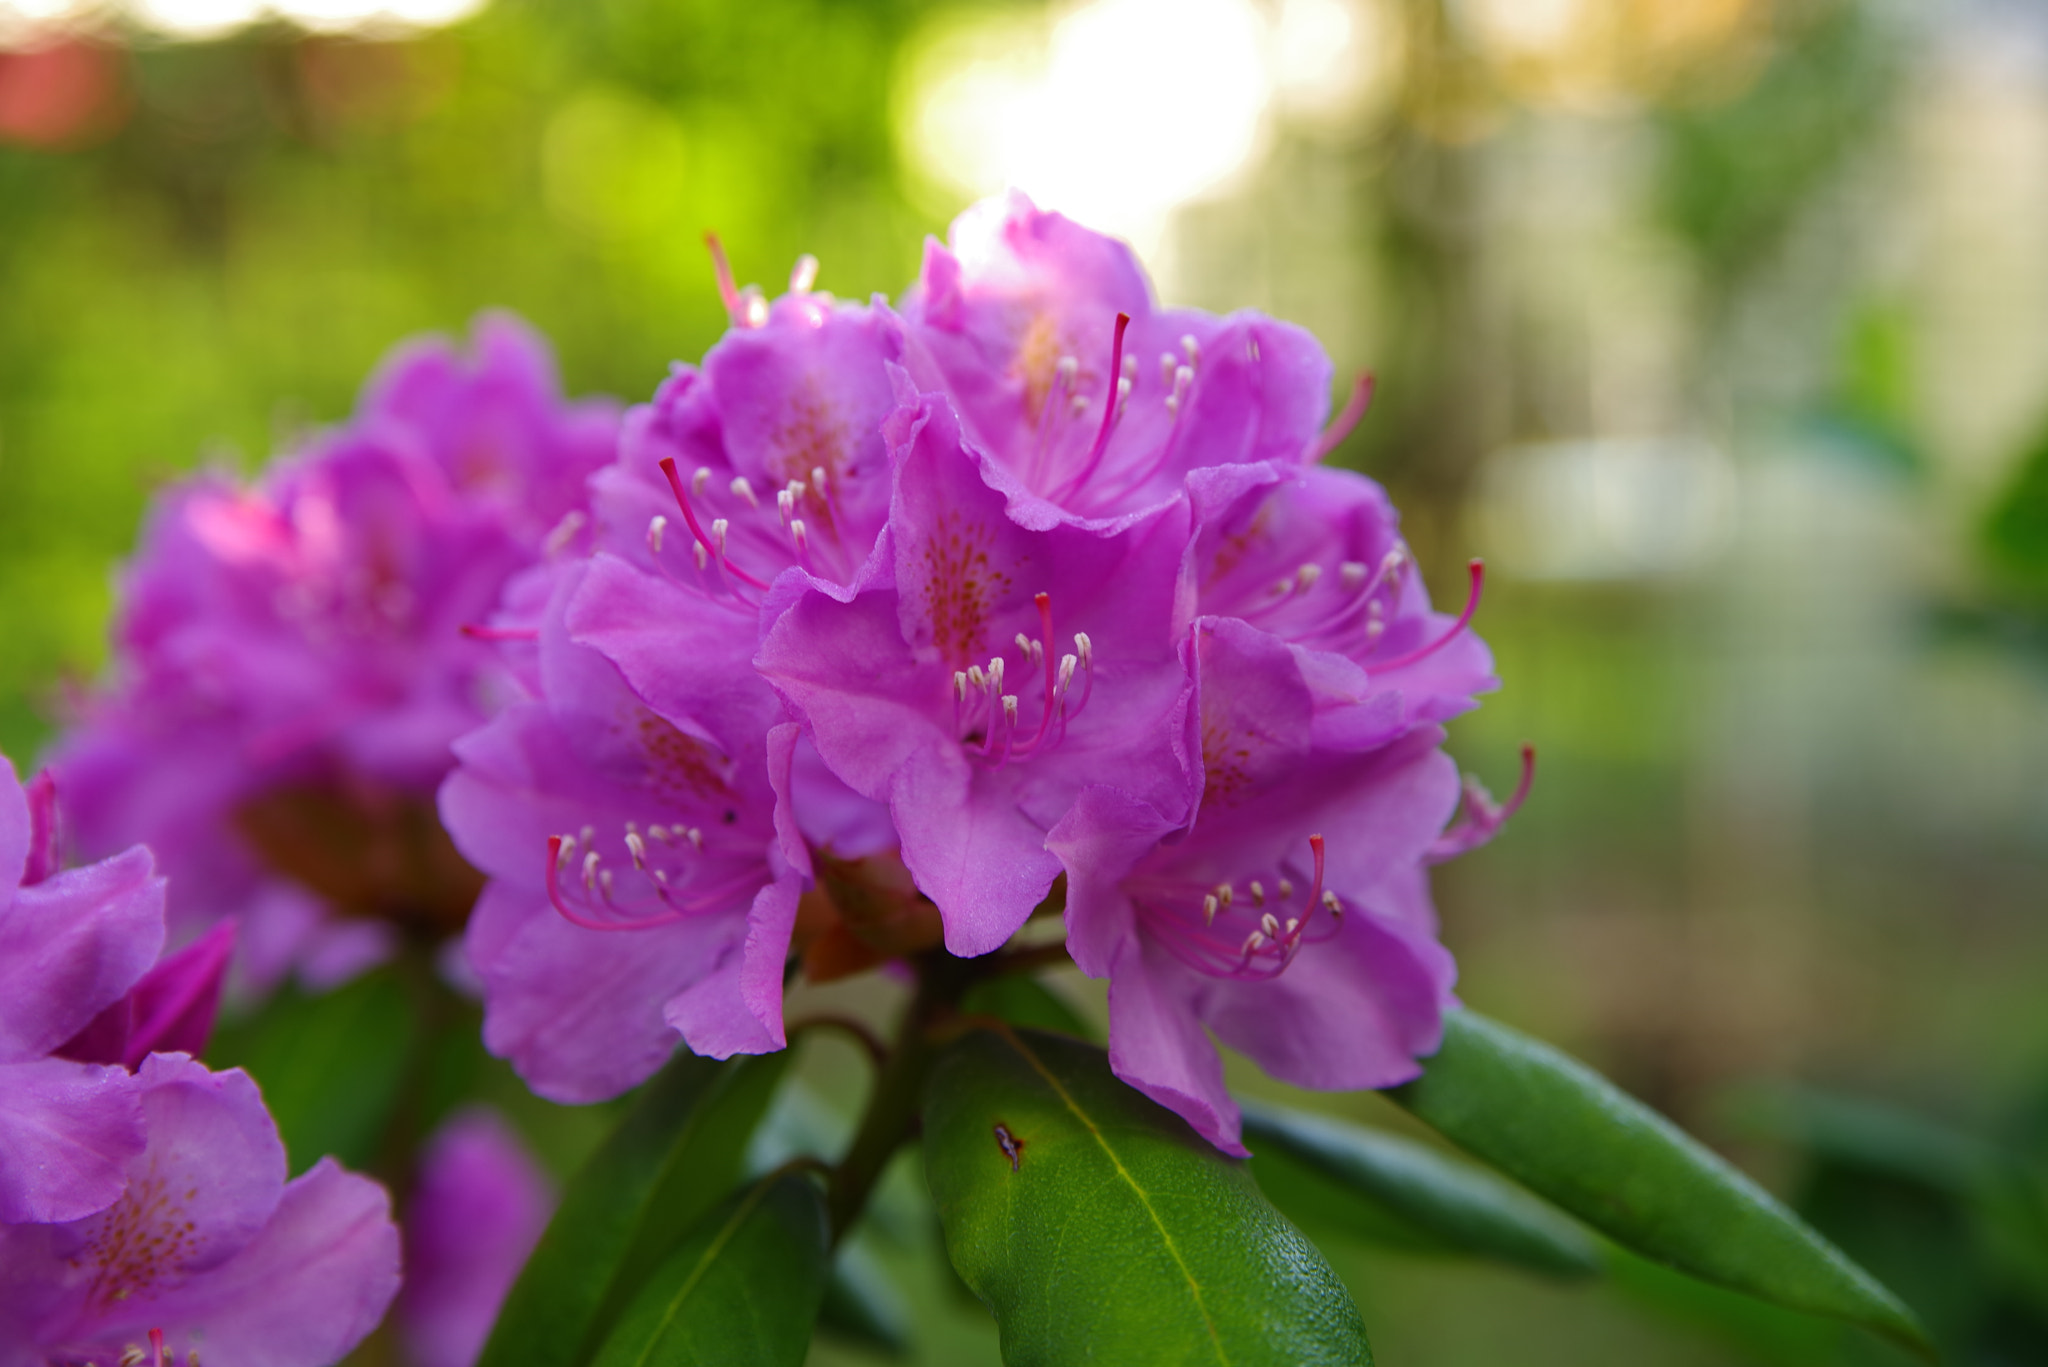 Pentax K-1 sample photo. Rhododendron photography